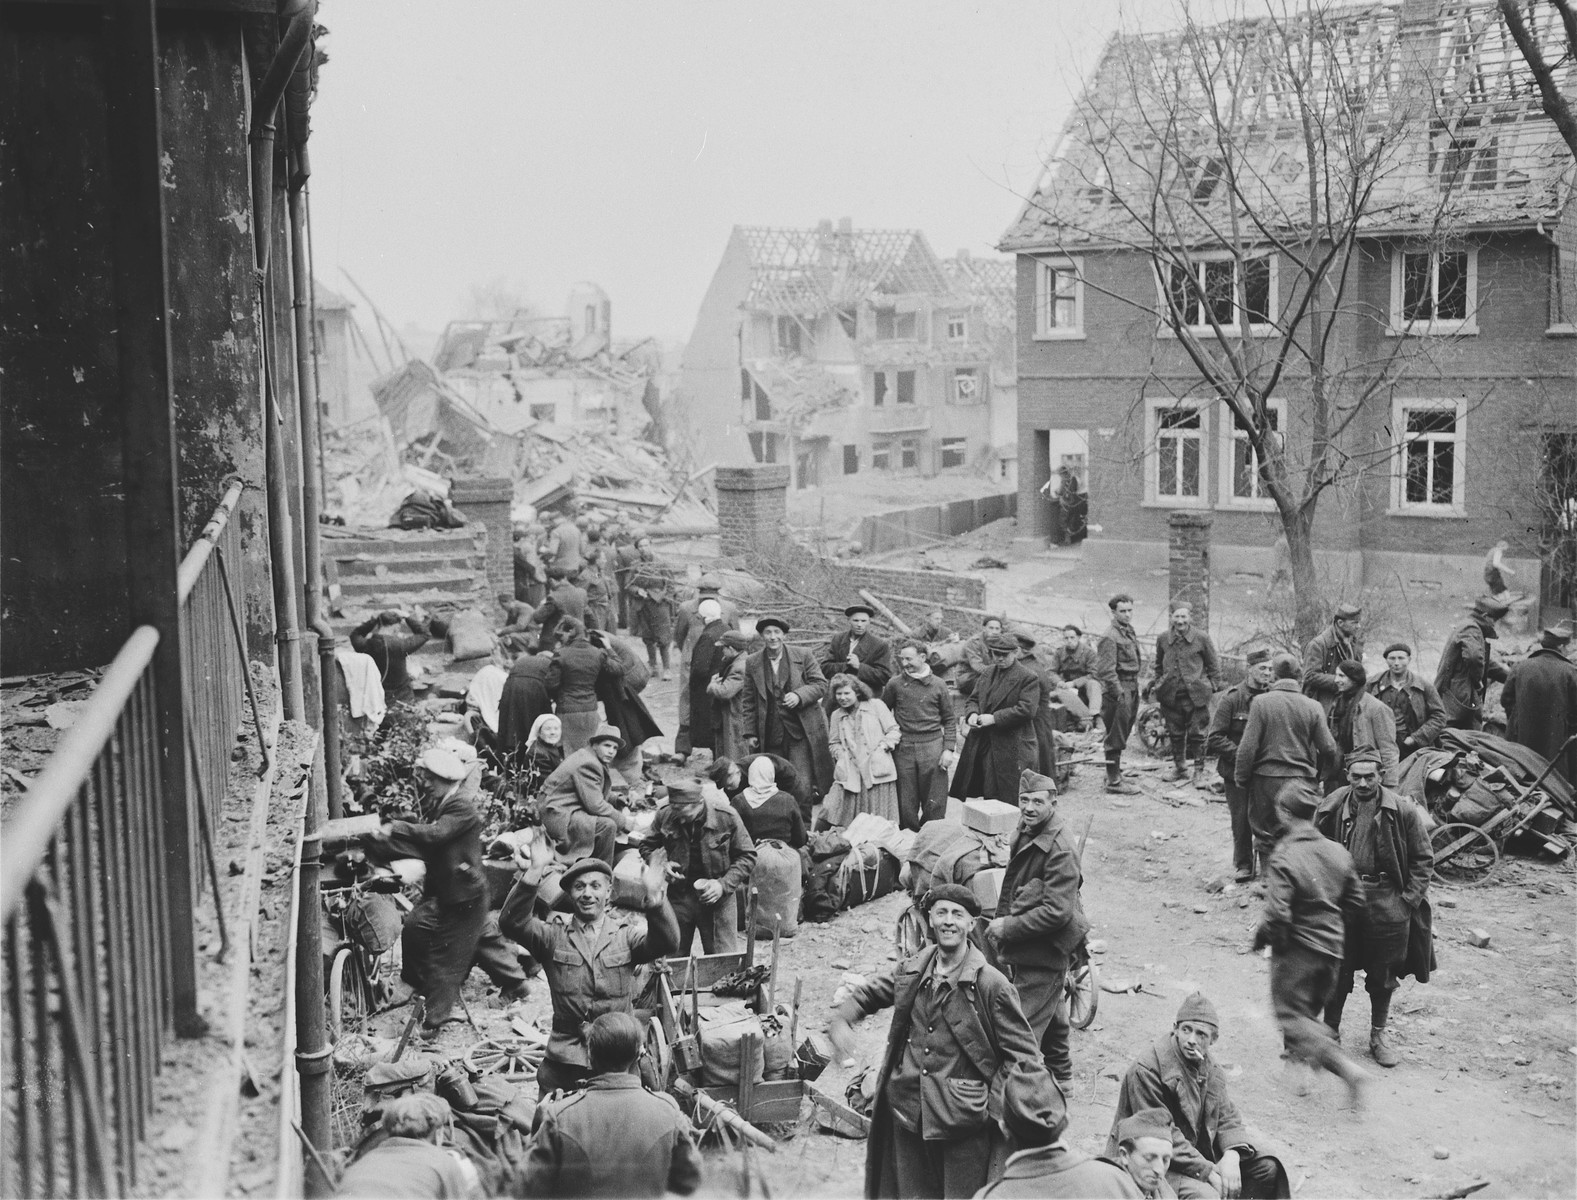 Slave laborers in the town of Altenkirchen, who were liberated by the U.S. First Army, collect their belongings and await evacuation to a nearby area.